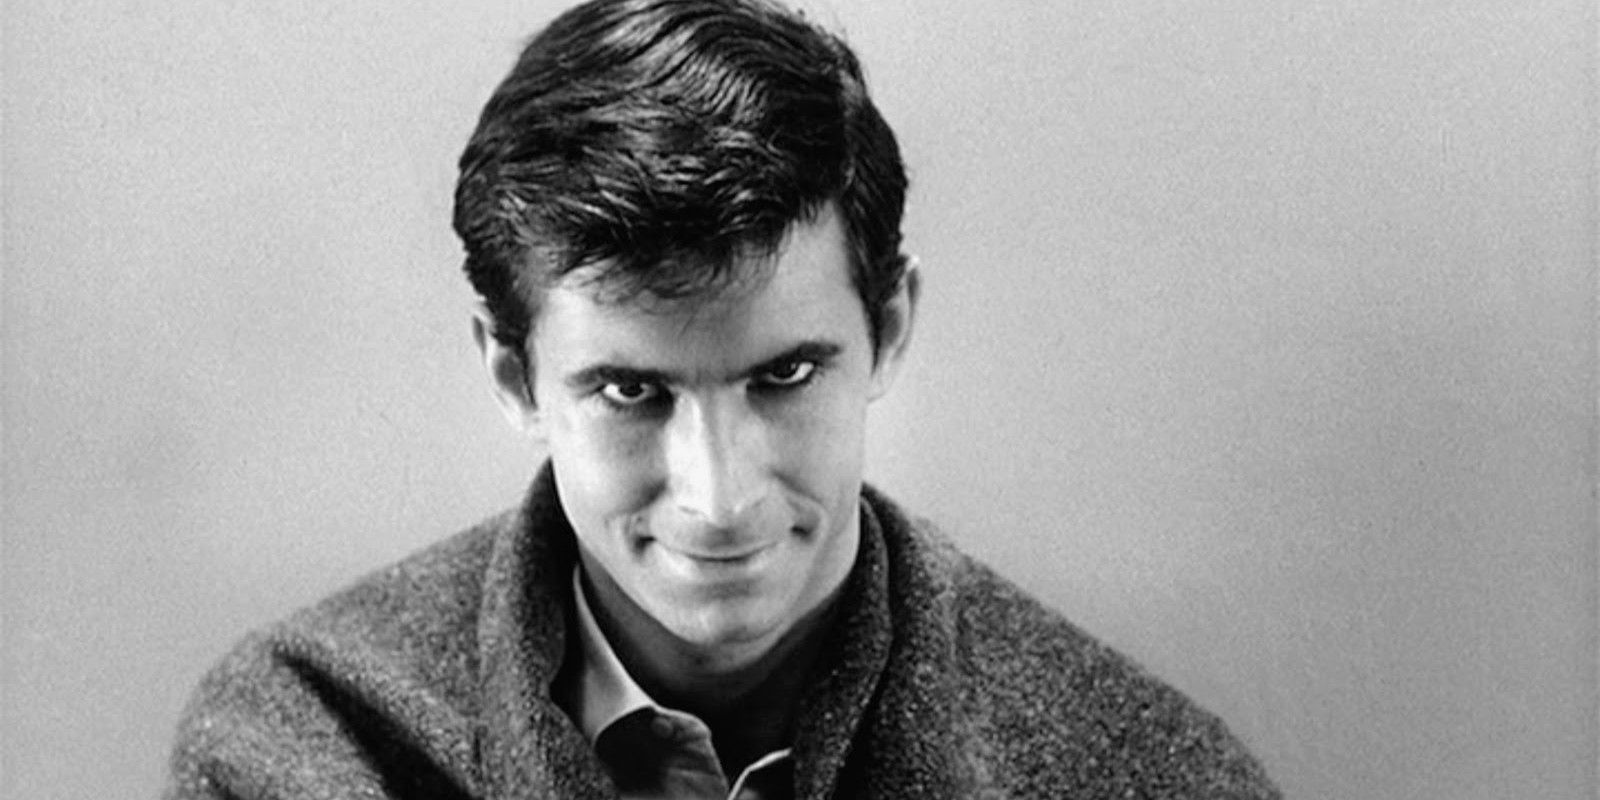 Anthony Perkins as Norman Bates in Psycho